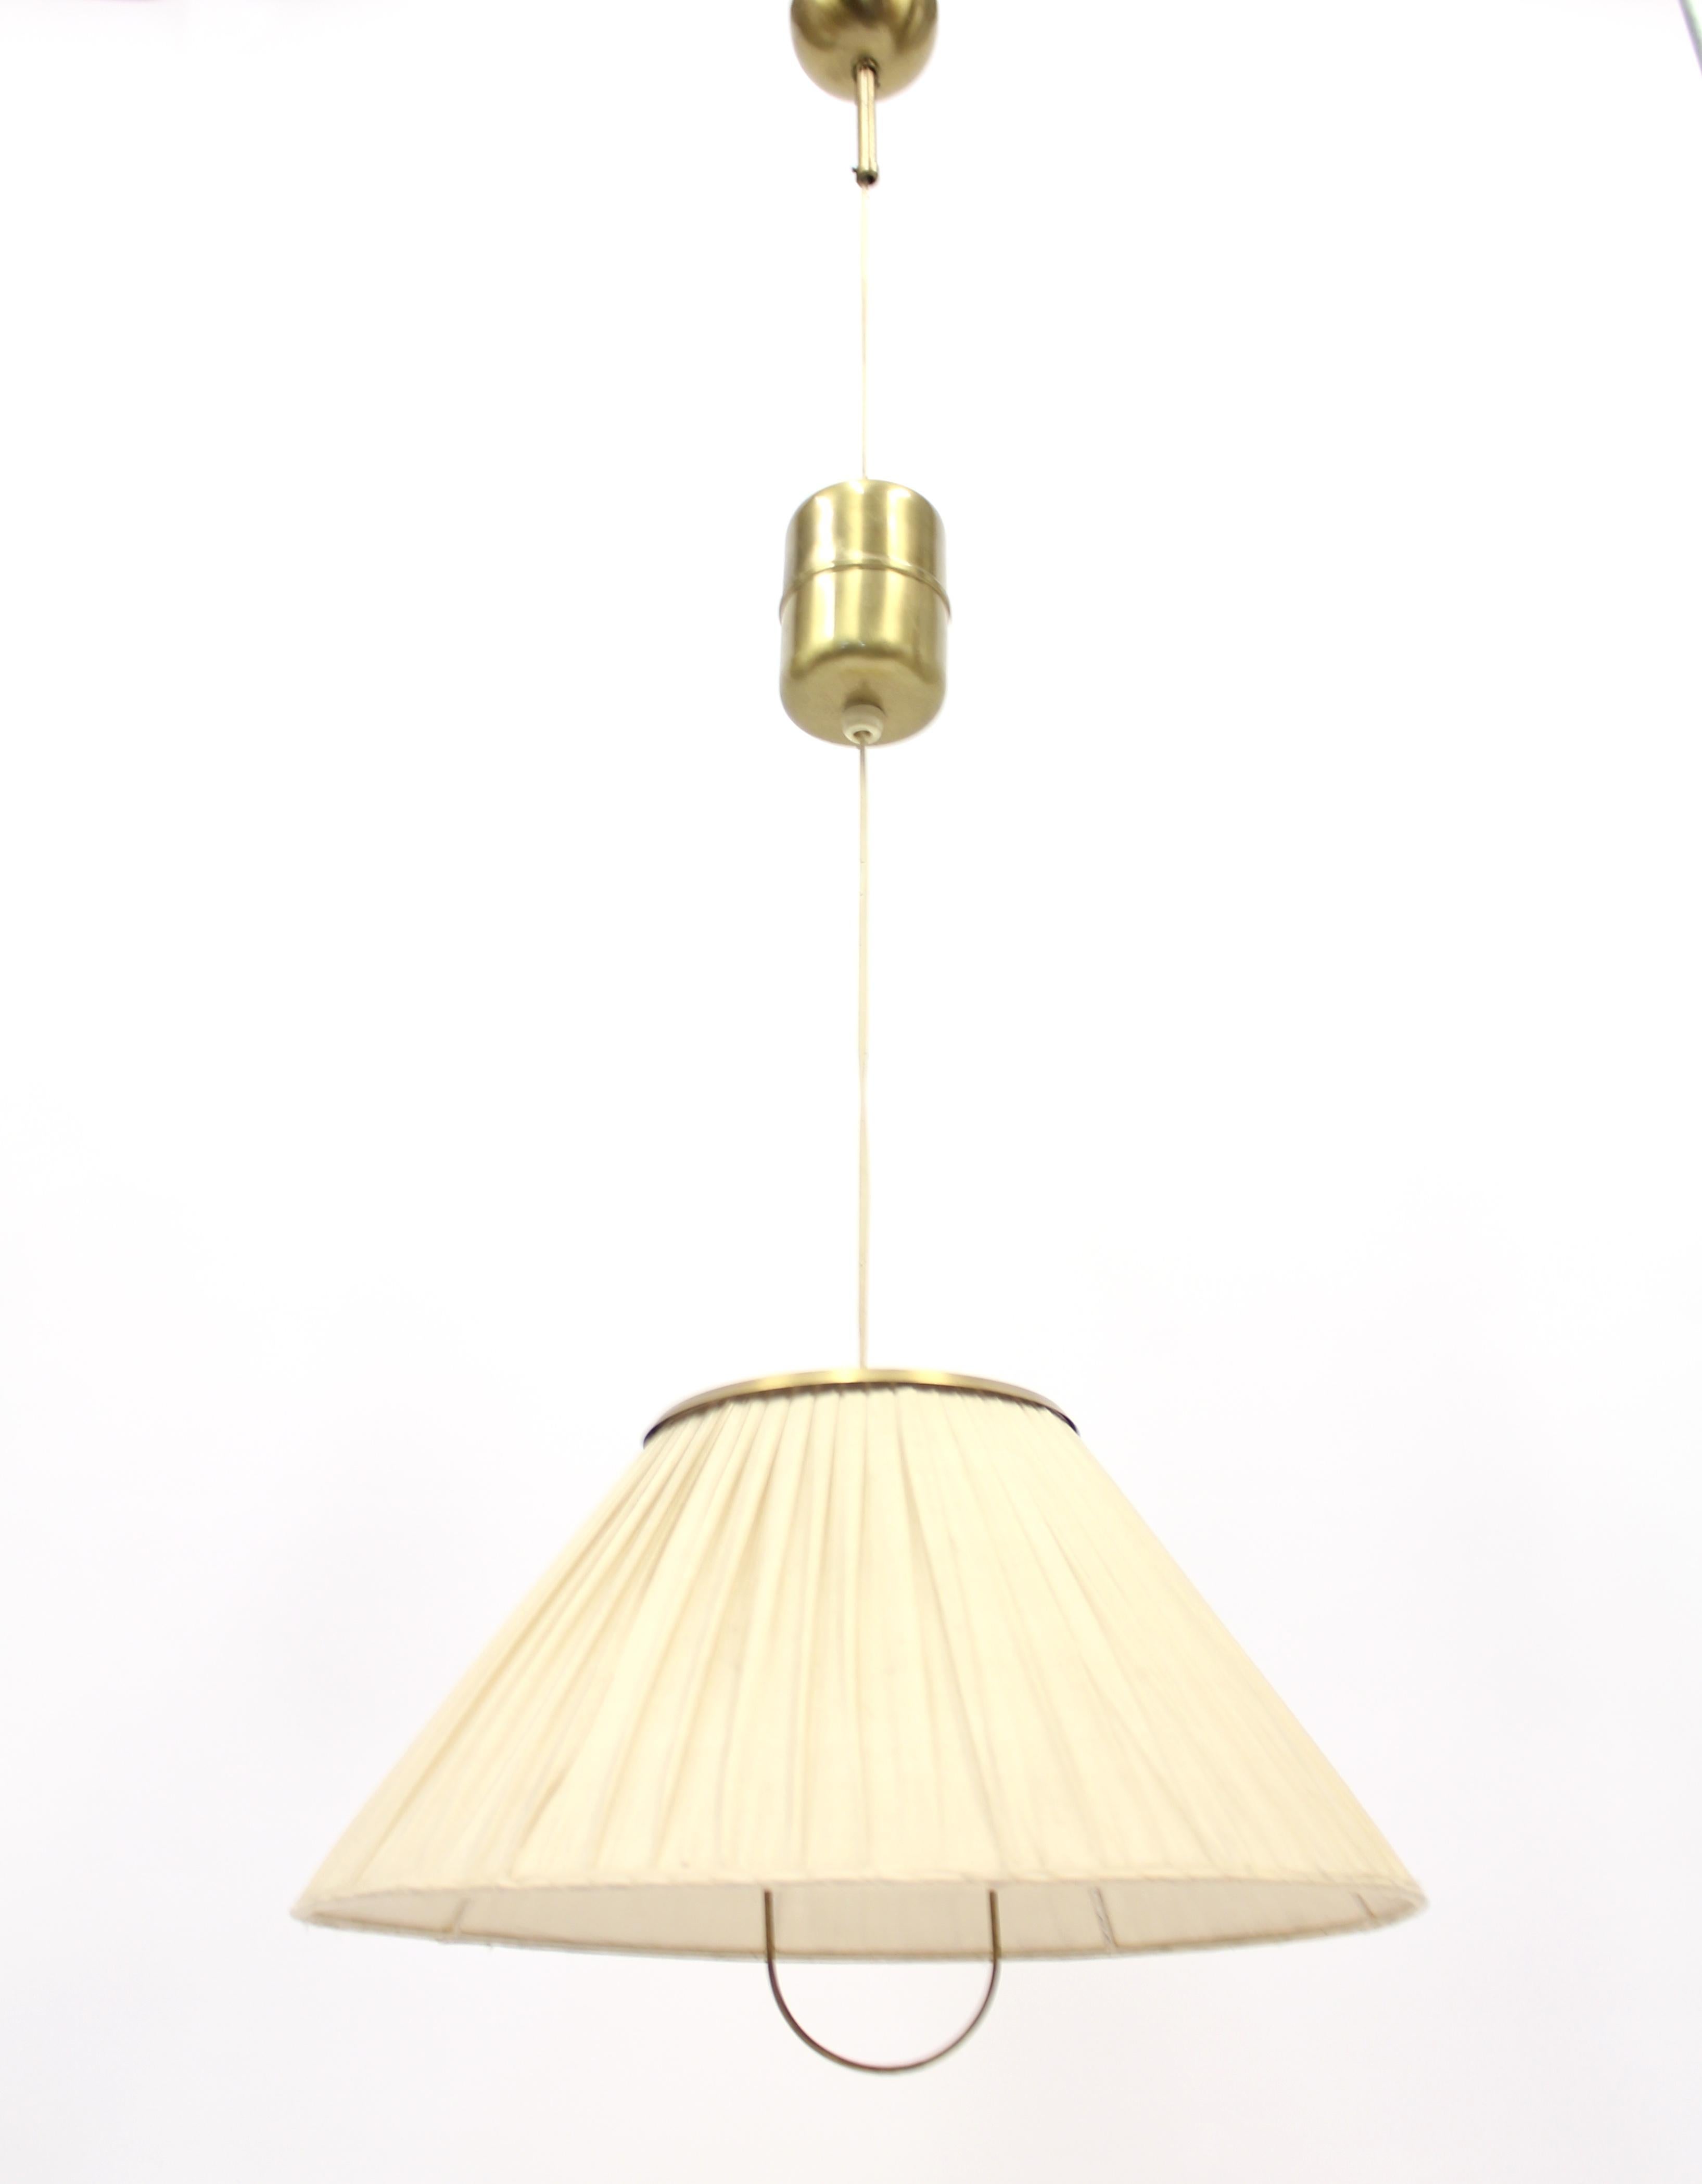 Rare height adjustable ceiling lamp in brass, model 1844, by Josef Frank for Svenskt Tenn. This is an early production, all original parts including the double layered fabric witch is in a good vintage condition: Two rips on the inside of the shade